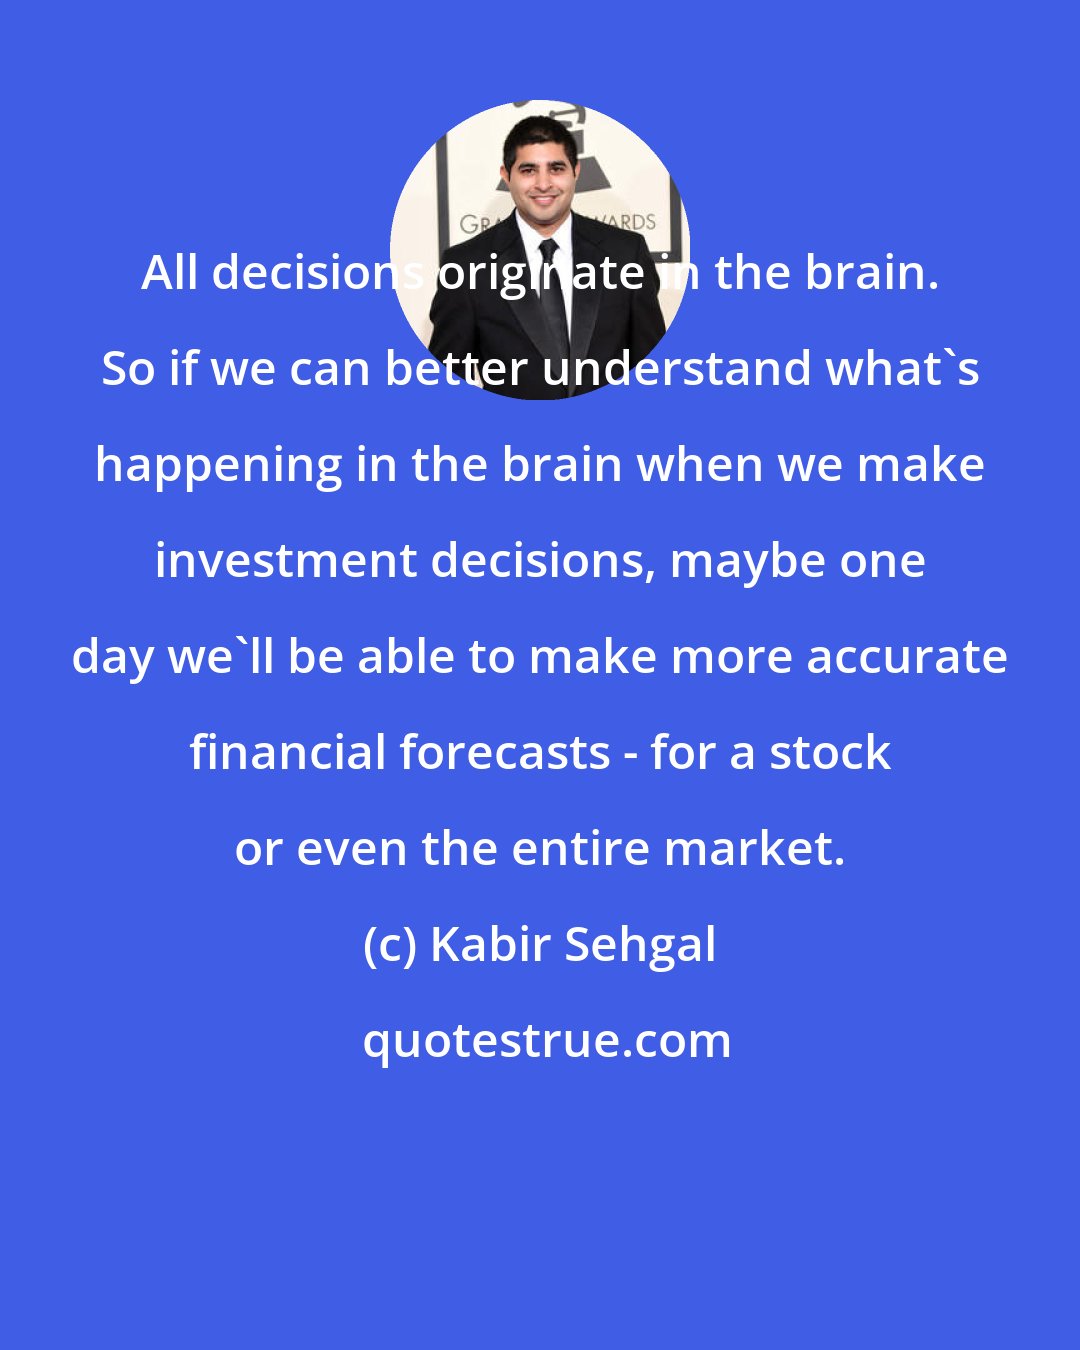 Kabir Sehgal: All decisions originate in the brain. So if we can better understand what's happening in the brain when we make investment decisions, maybe one day we'll be able to make more accurate financial forecasts - for a stock or even the entire market.